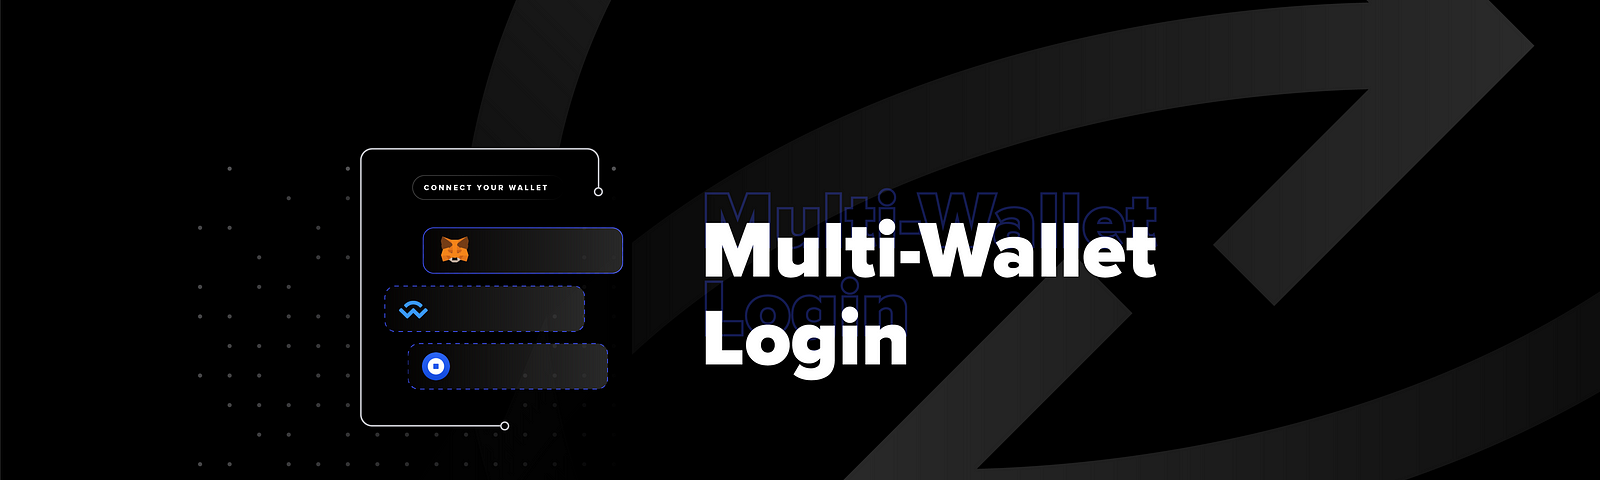 Available login wallets include Metamask, WalletConnect, and Coinbase Wallet.